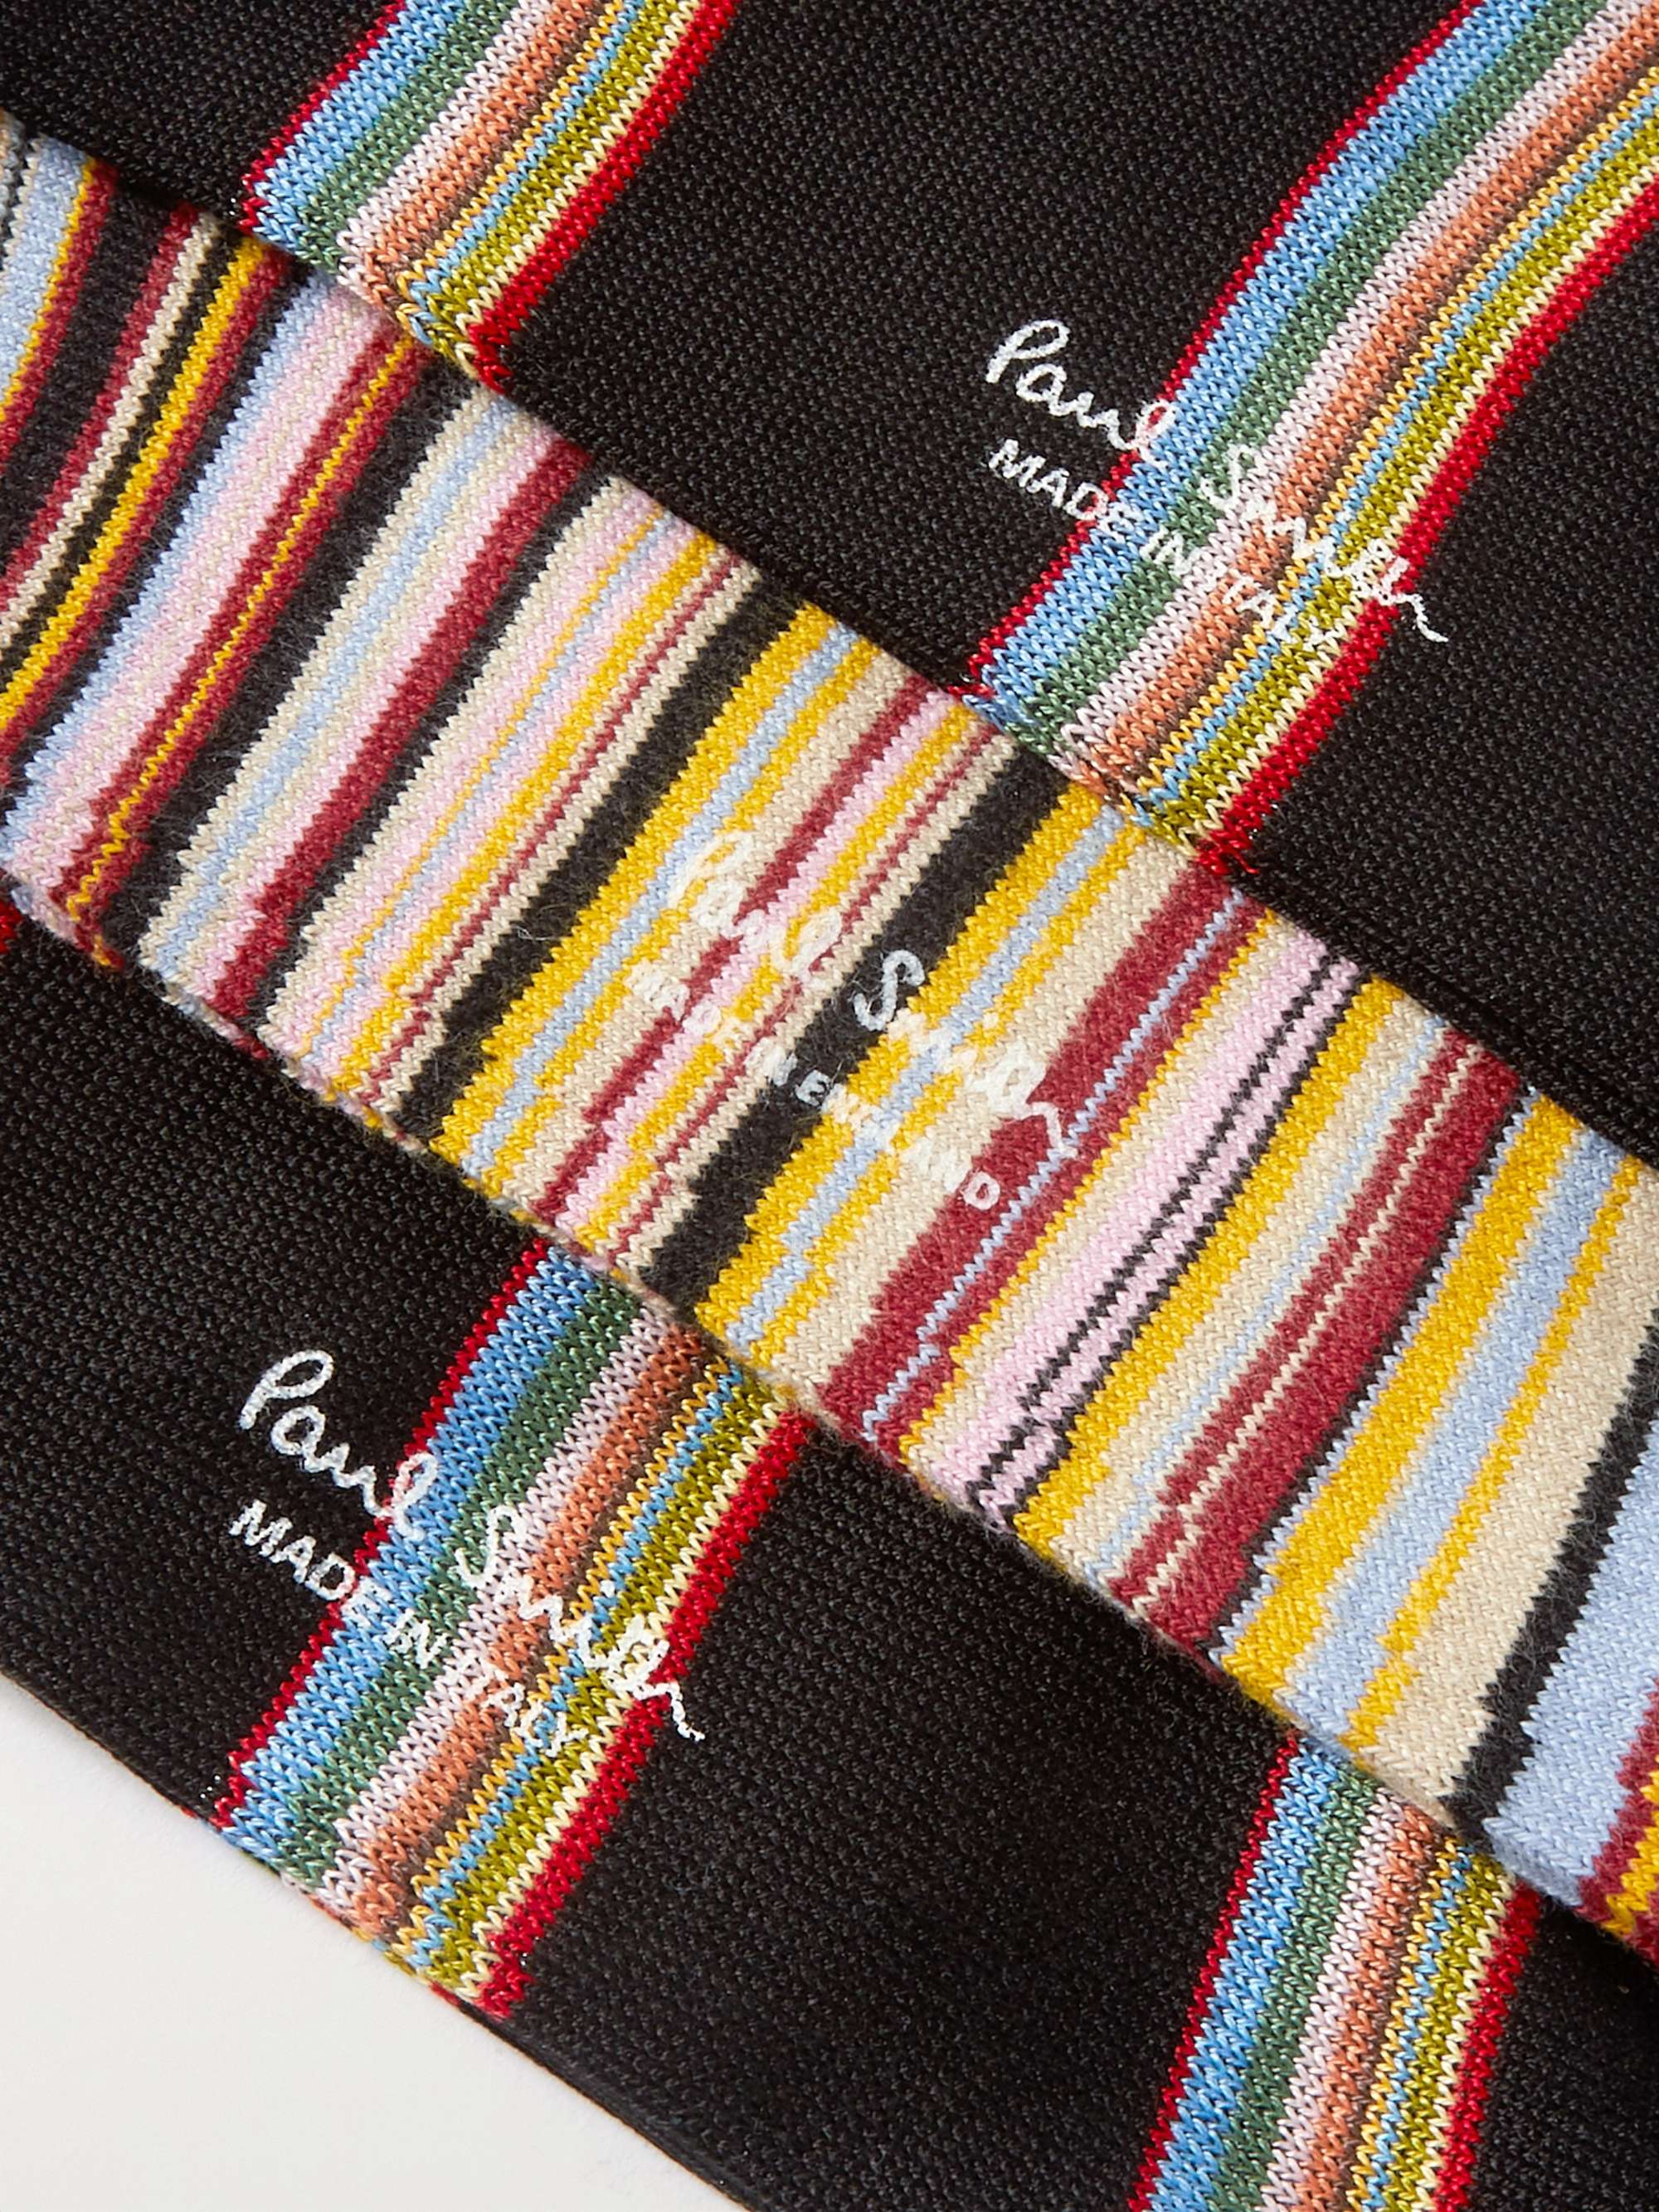 PAUL SMITH Striped Leather Cardholder and Three-Pack Cotton-Blend Socks Gift Set